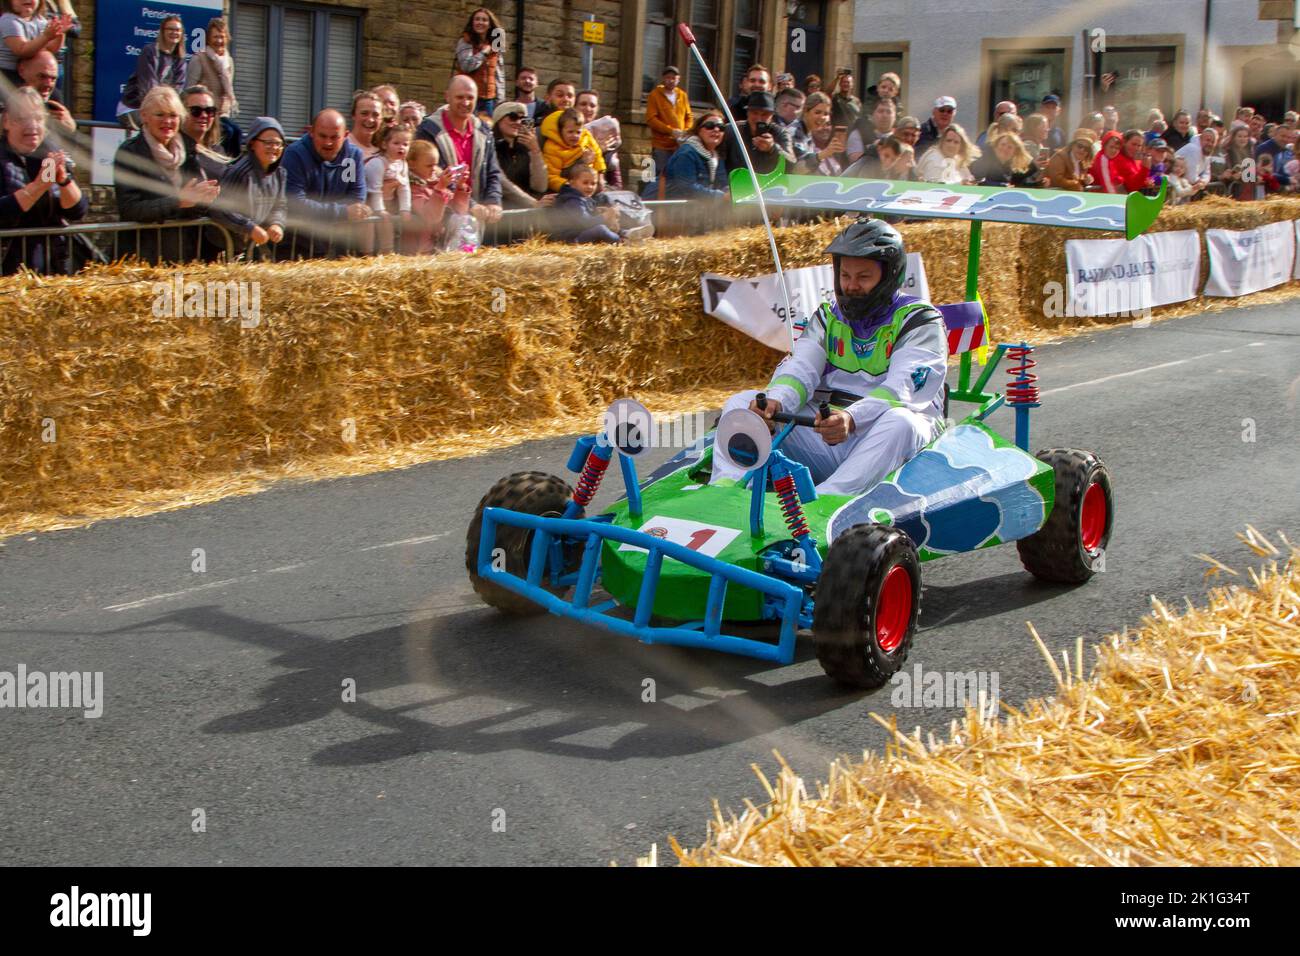 Longridge, Preston. UK News 18 September 2022; Soapbox Derby community charity event happening in the heart of the village A day of “family fun, racing, wacky costumes and carts, thrills and spills” attracted thousands of visitors to the town's main street. Motorless, hand-made, wooden vehicles raced down Berry Lane as the village's main high street was converted into an unusual race track for the day. The event has been organised to raise vital funds for local charity Longridge Community Action. 'Fitness Plus Cart No.6 Credit ; MediaWorldImages/Alamy LiveNews Stock Photo